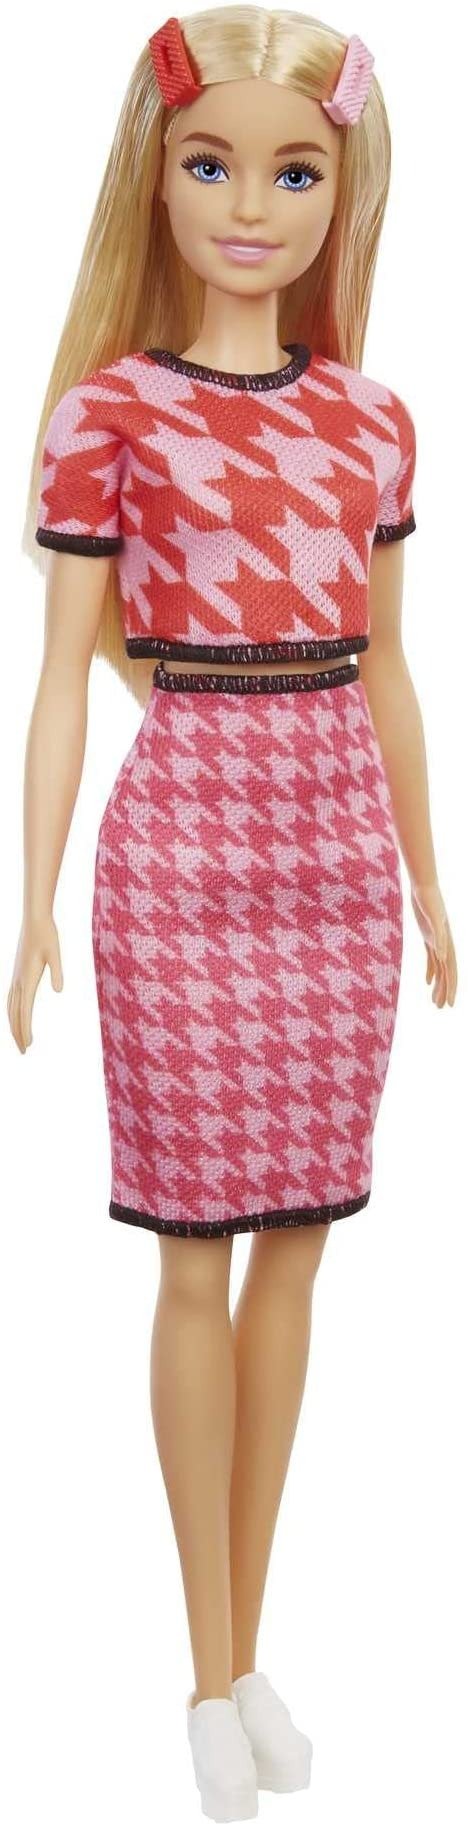 Fashionistas Dolls, Toy for Kids 3 to 8 Years Old